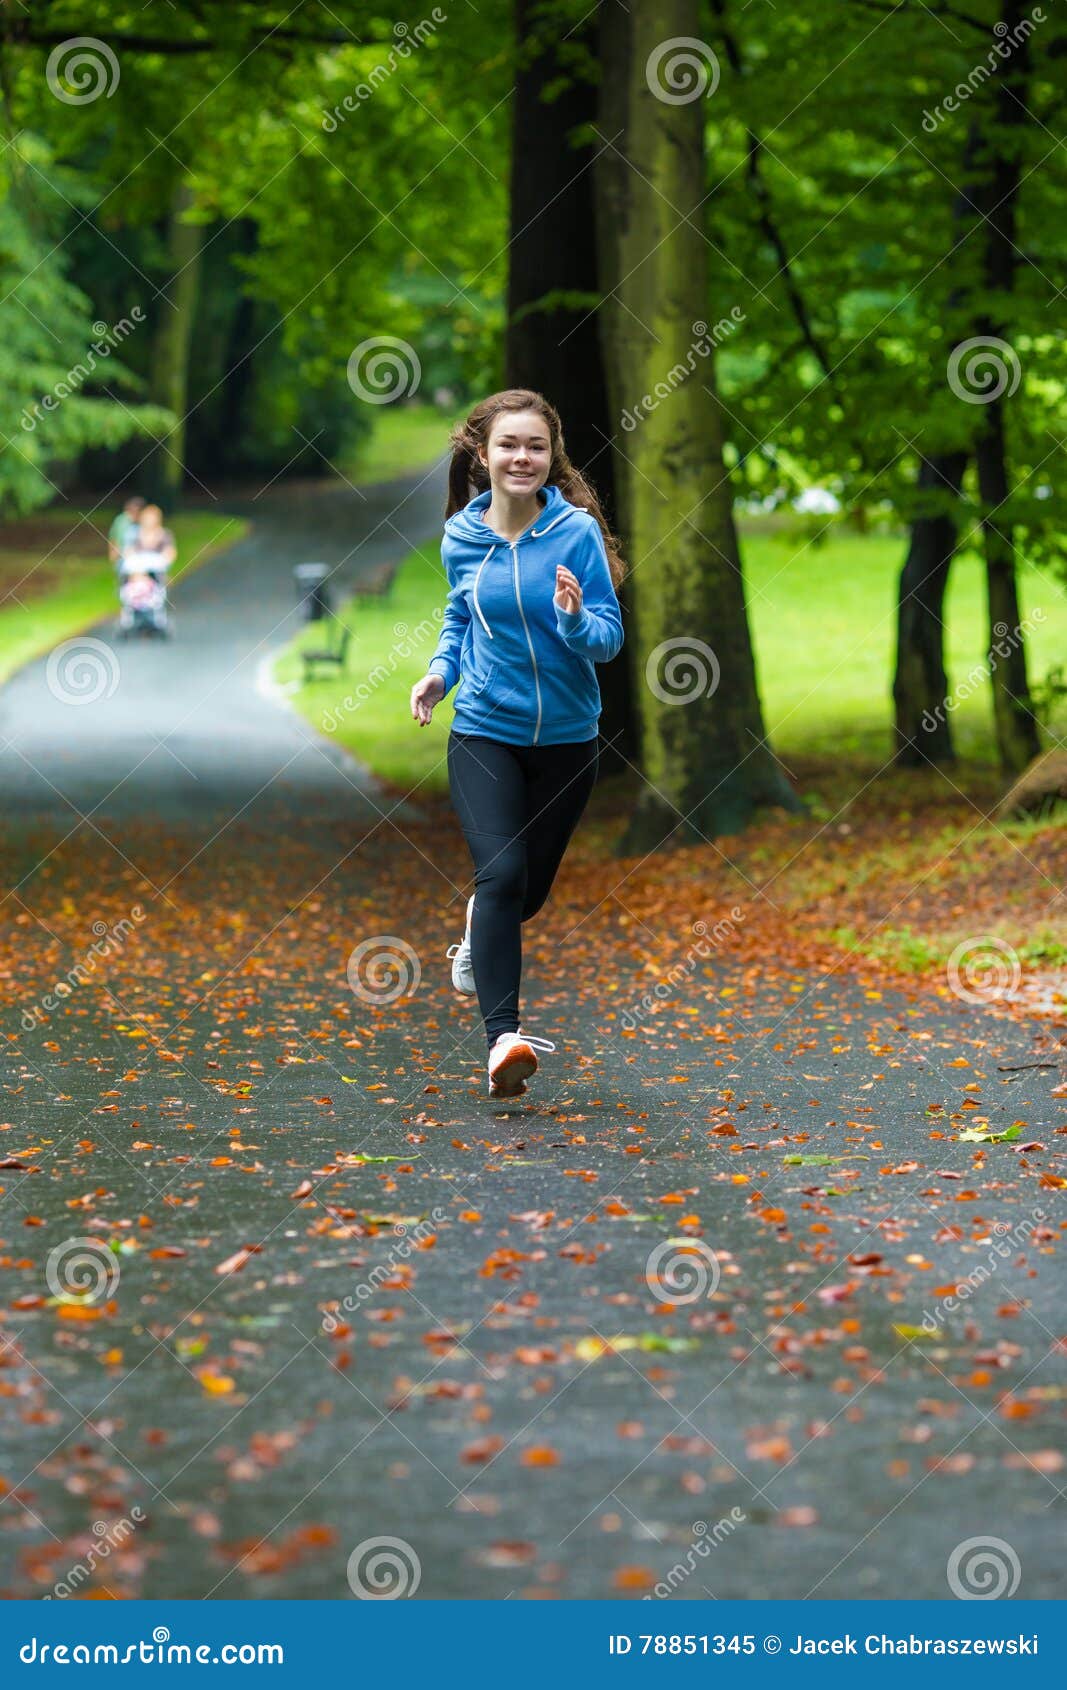 Girl running outdoor stock image. Image of blue, cloudy - 78851345